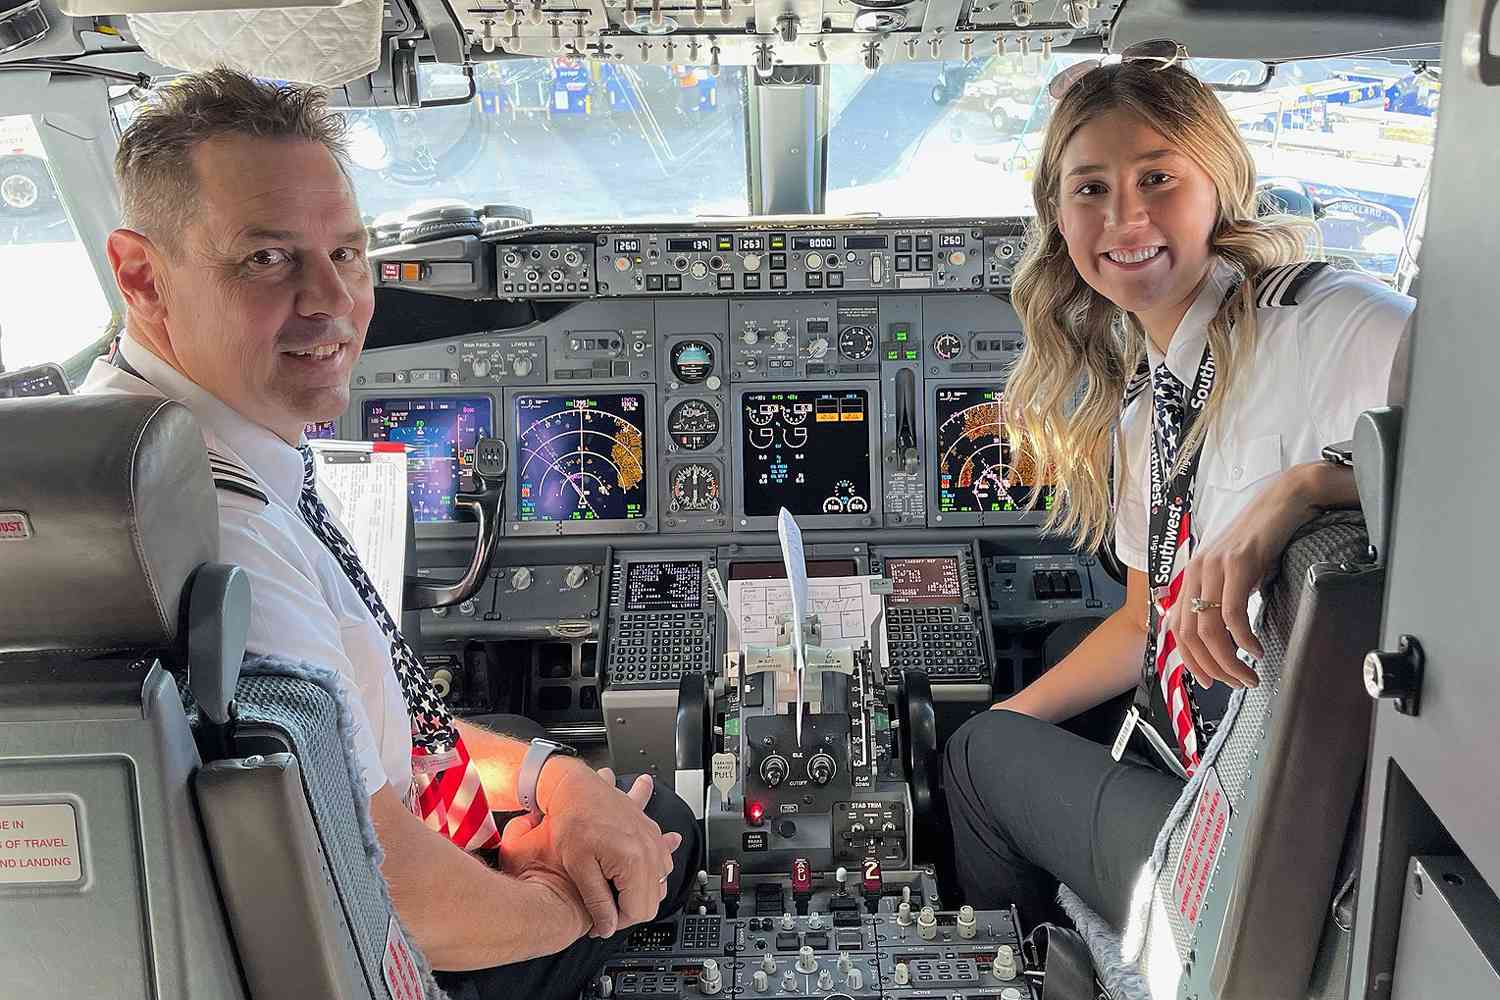 Daughter Grew Up Wanting to Be a Pilot, Like Her Dad. Now They're Celebrating Their First Flight Together!